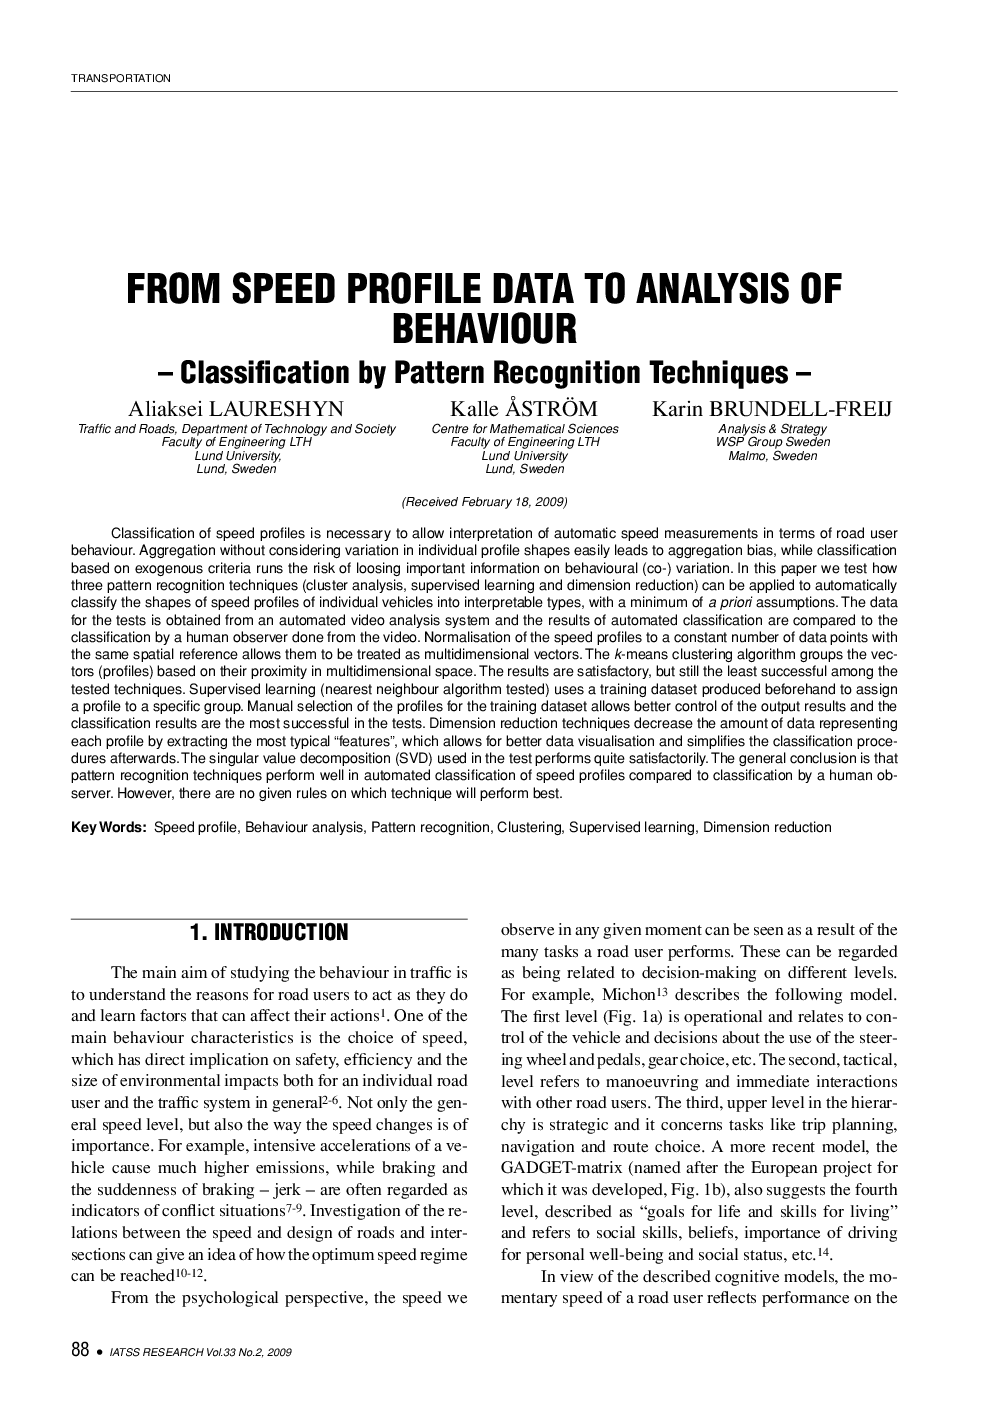 FROM SPEED PROFILE DATA TO ANALYSIS OF BEHAVIOUR: Classification by Pattern Recognition Techniques